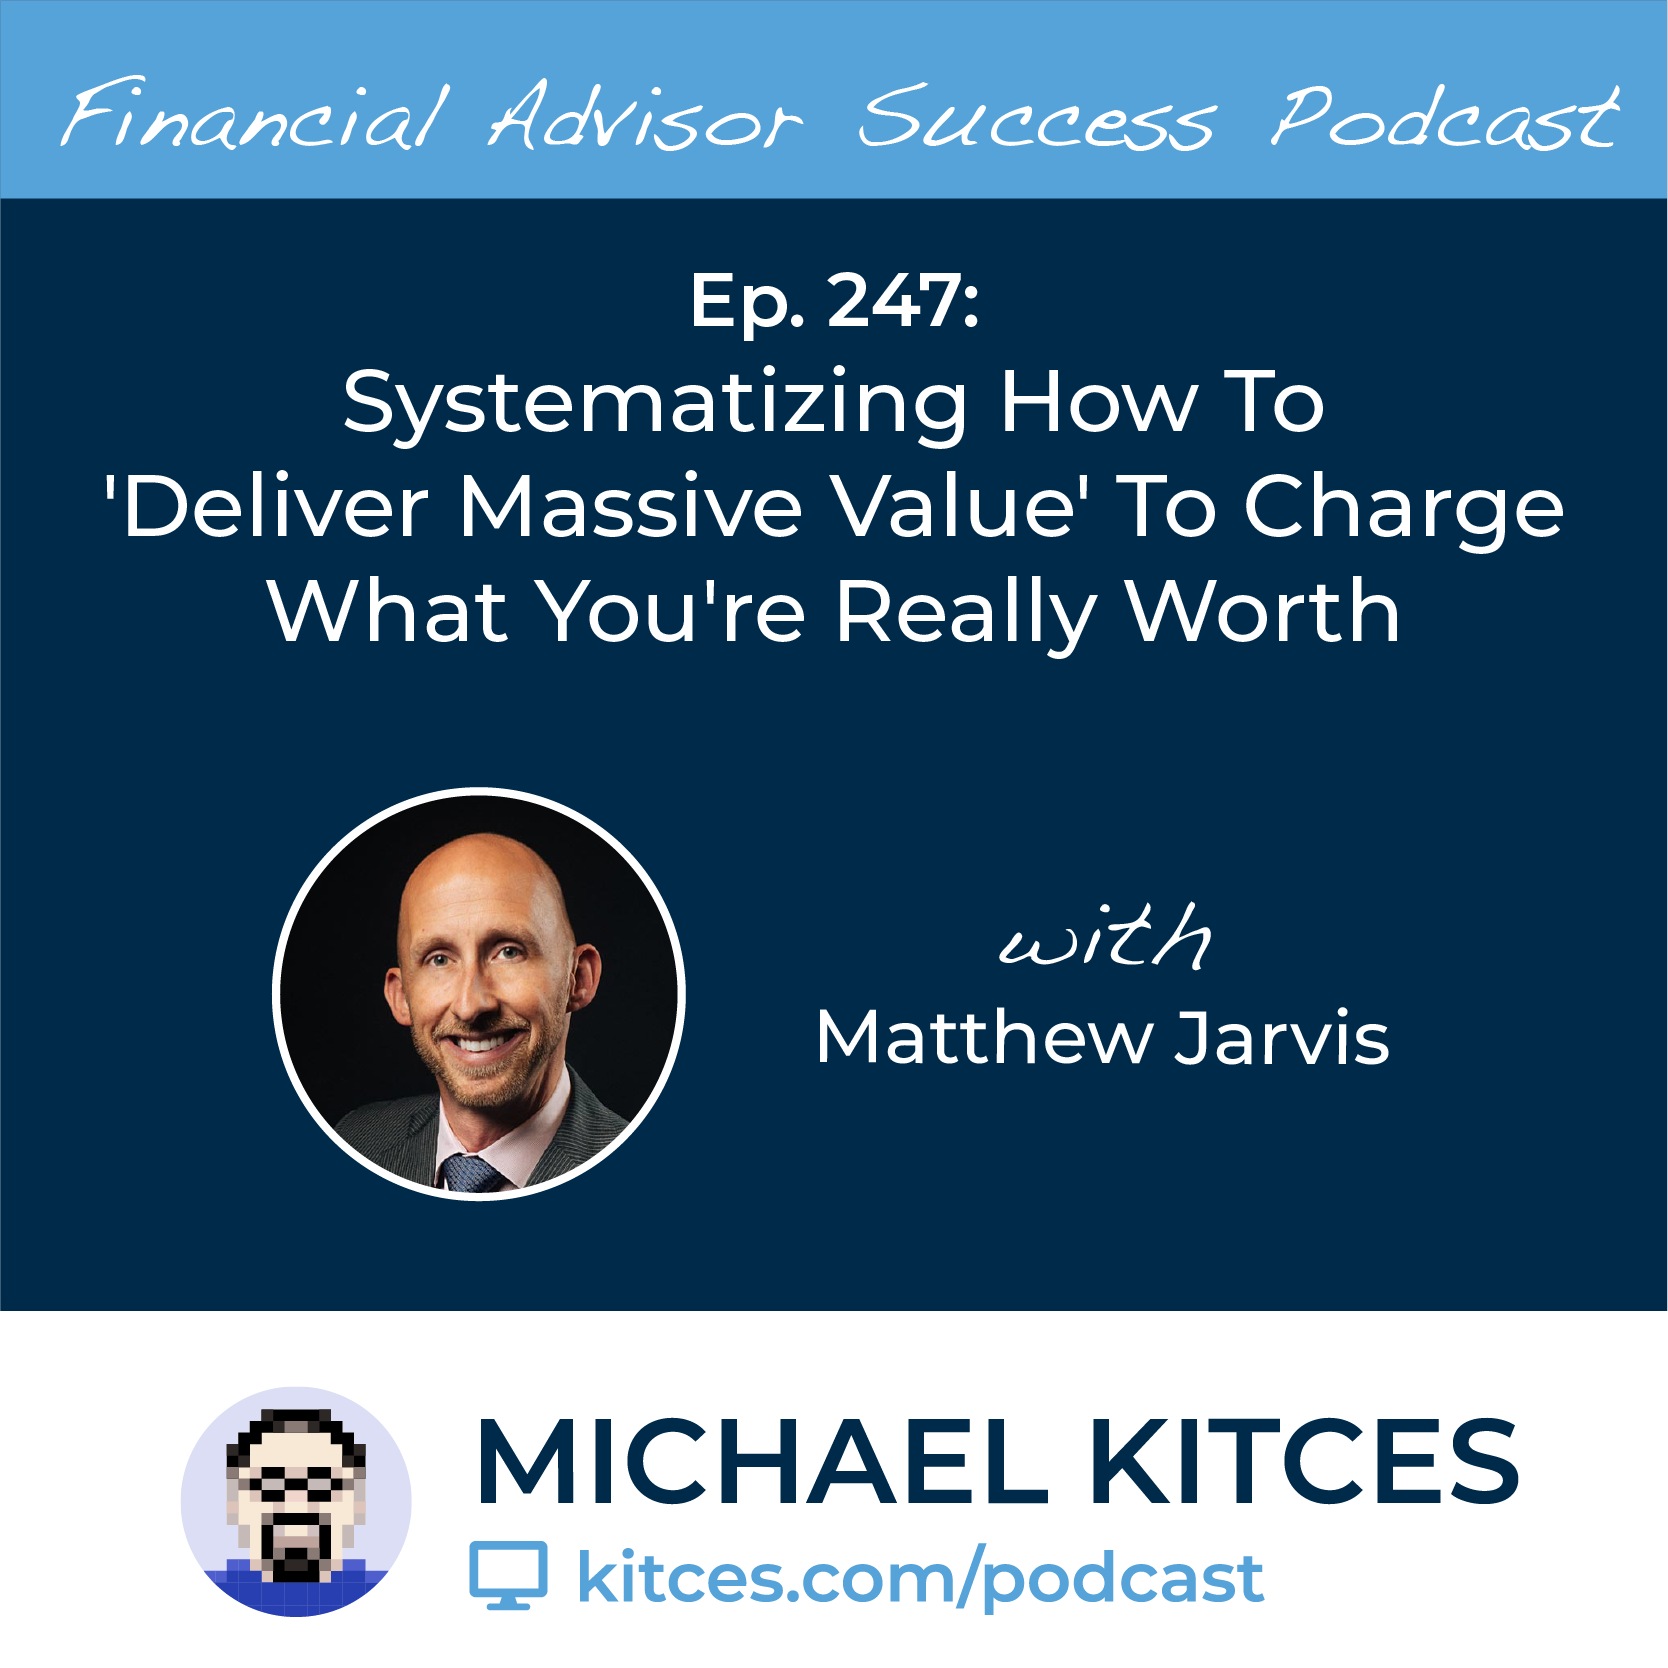 https://www.kitces.com/wp-content/uploads/2021/09/FAS-Ep-247-Matthew-Jarvis-02.png